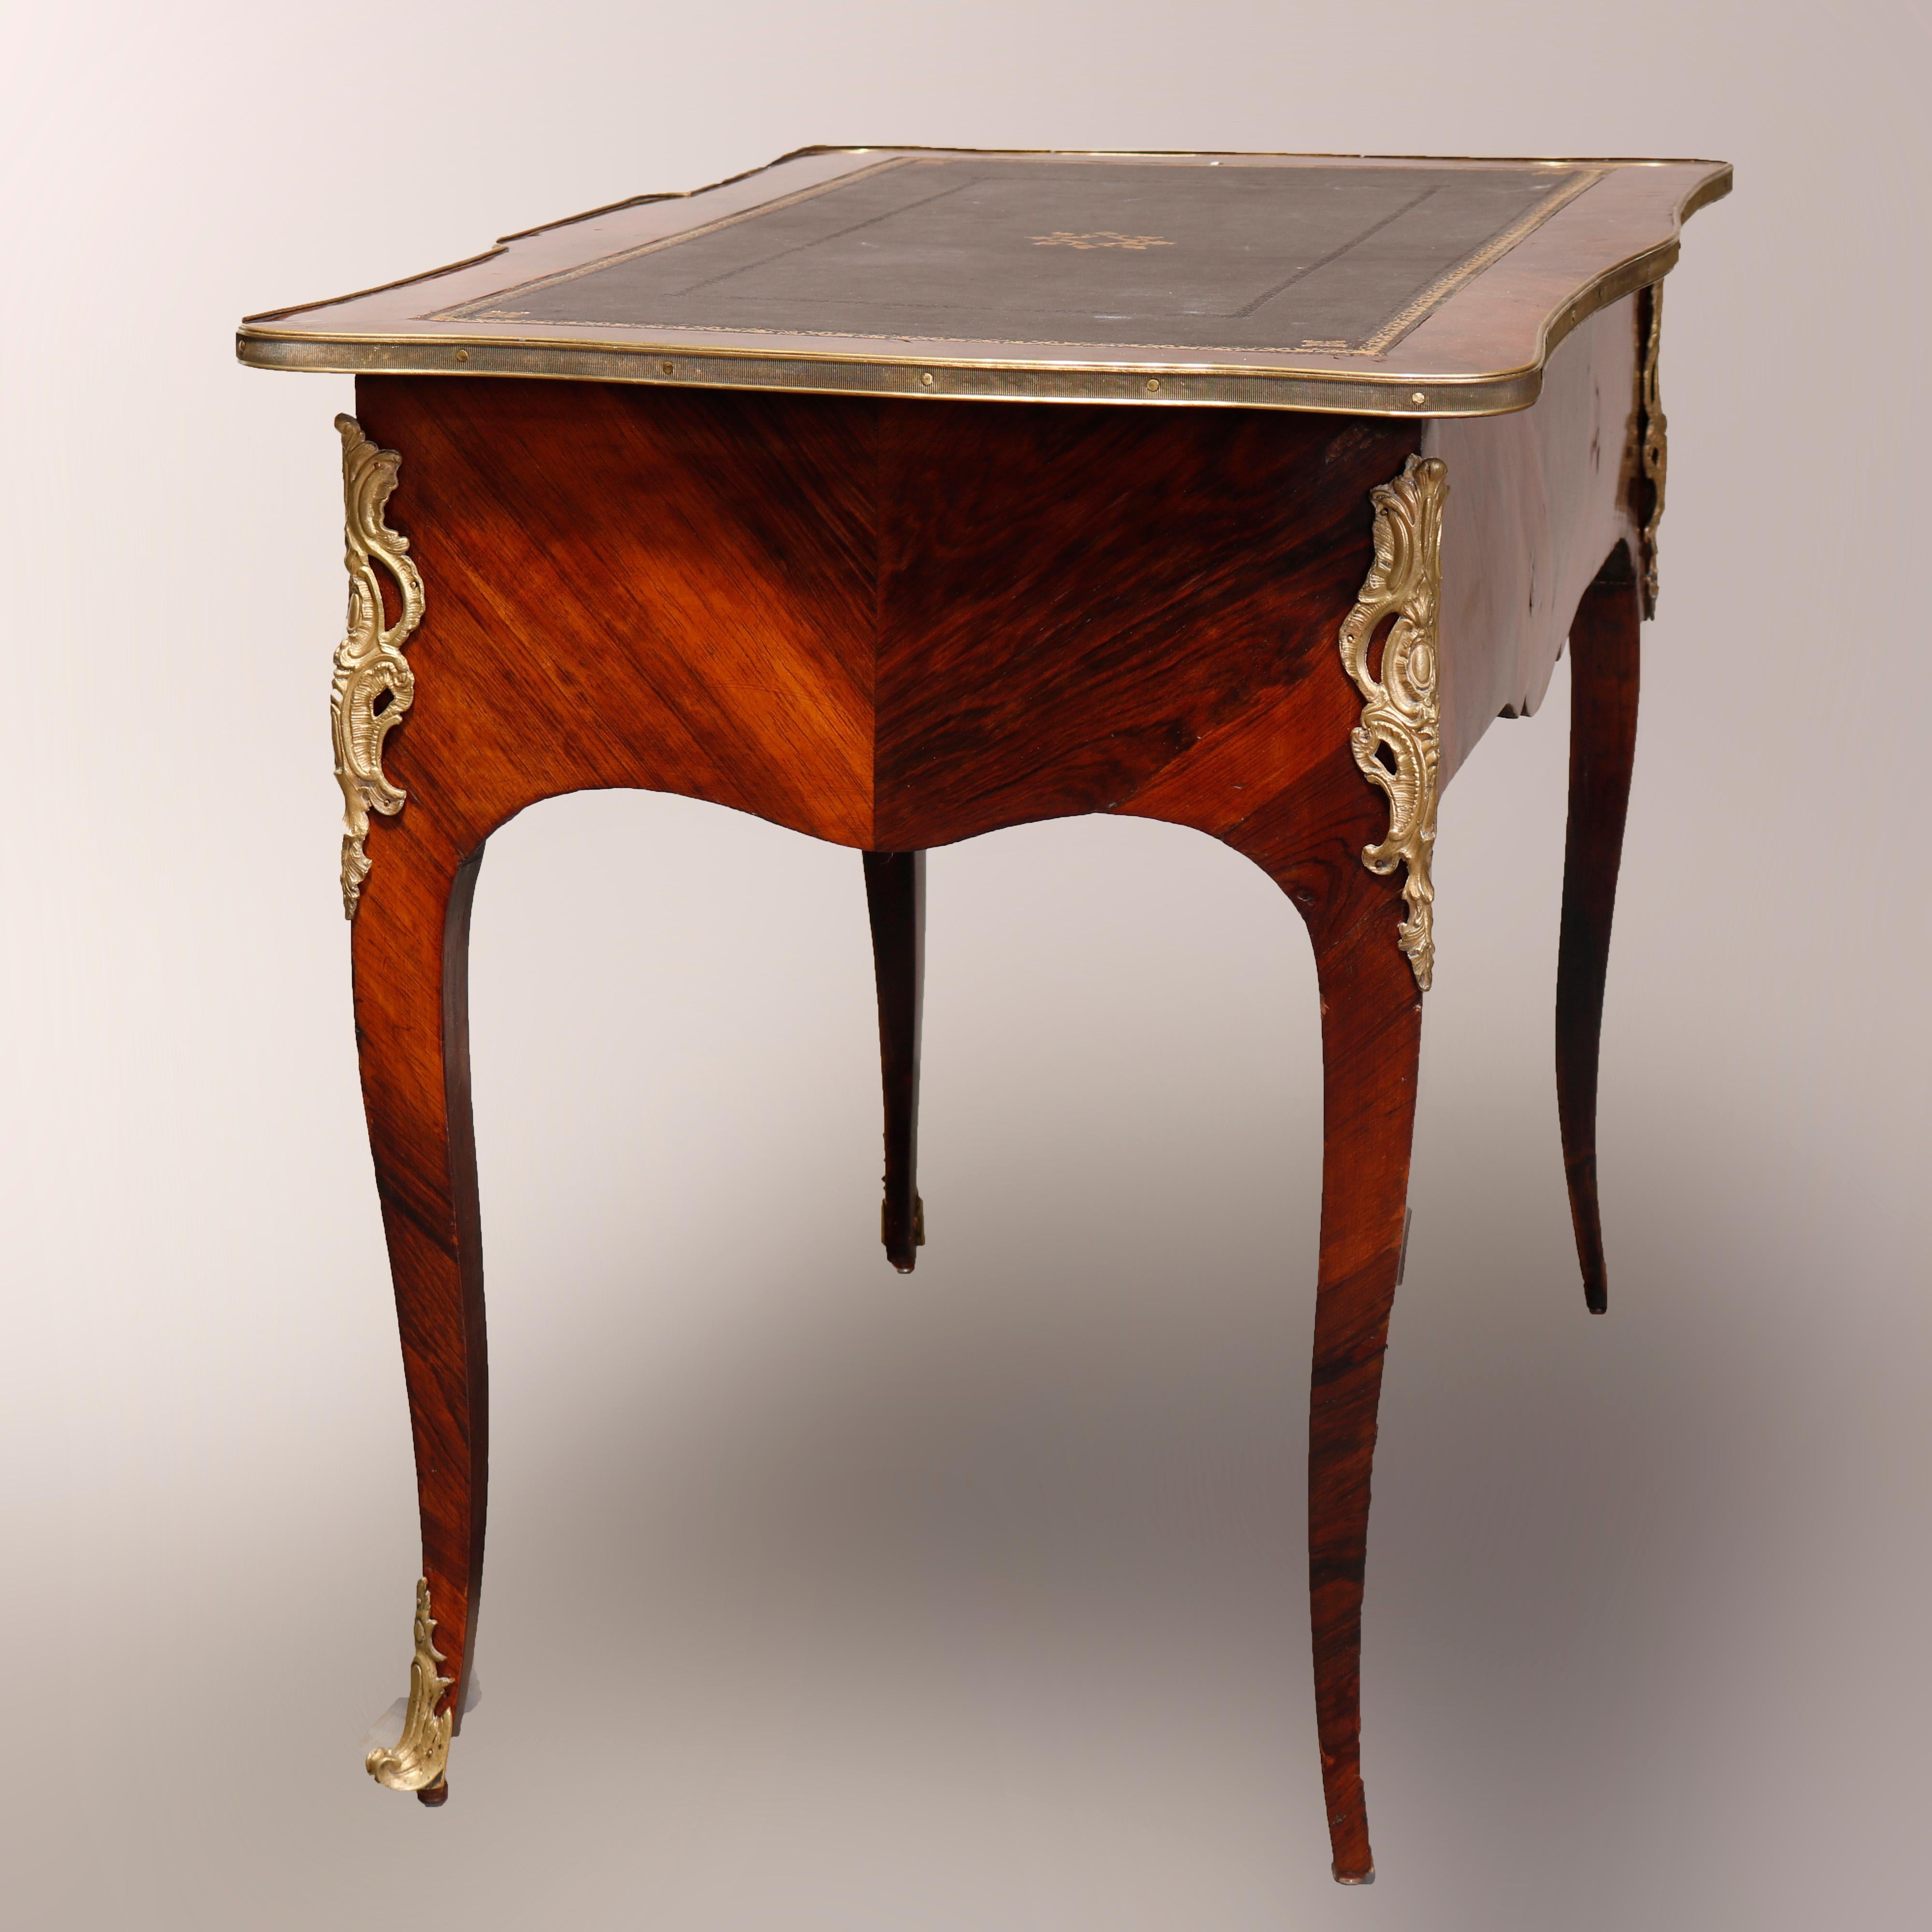 An antique French Louis XV style bureau plat writing desk offers rosewood construction with gilt adorned leather writing surface on shaped top with ormolu mounts throughout, raised on cabriole legs, circa 1890

Measures: 31.25